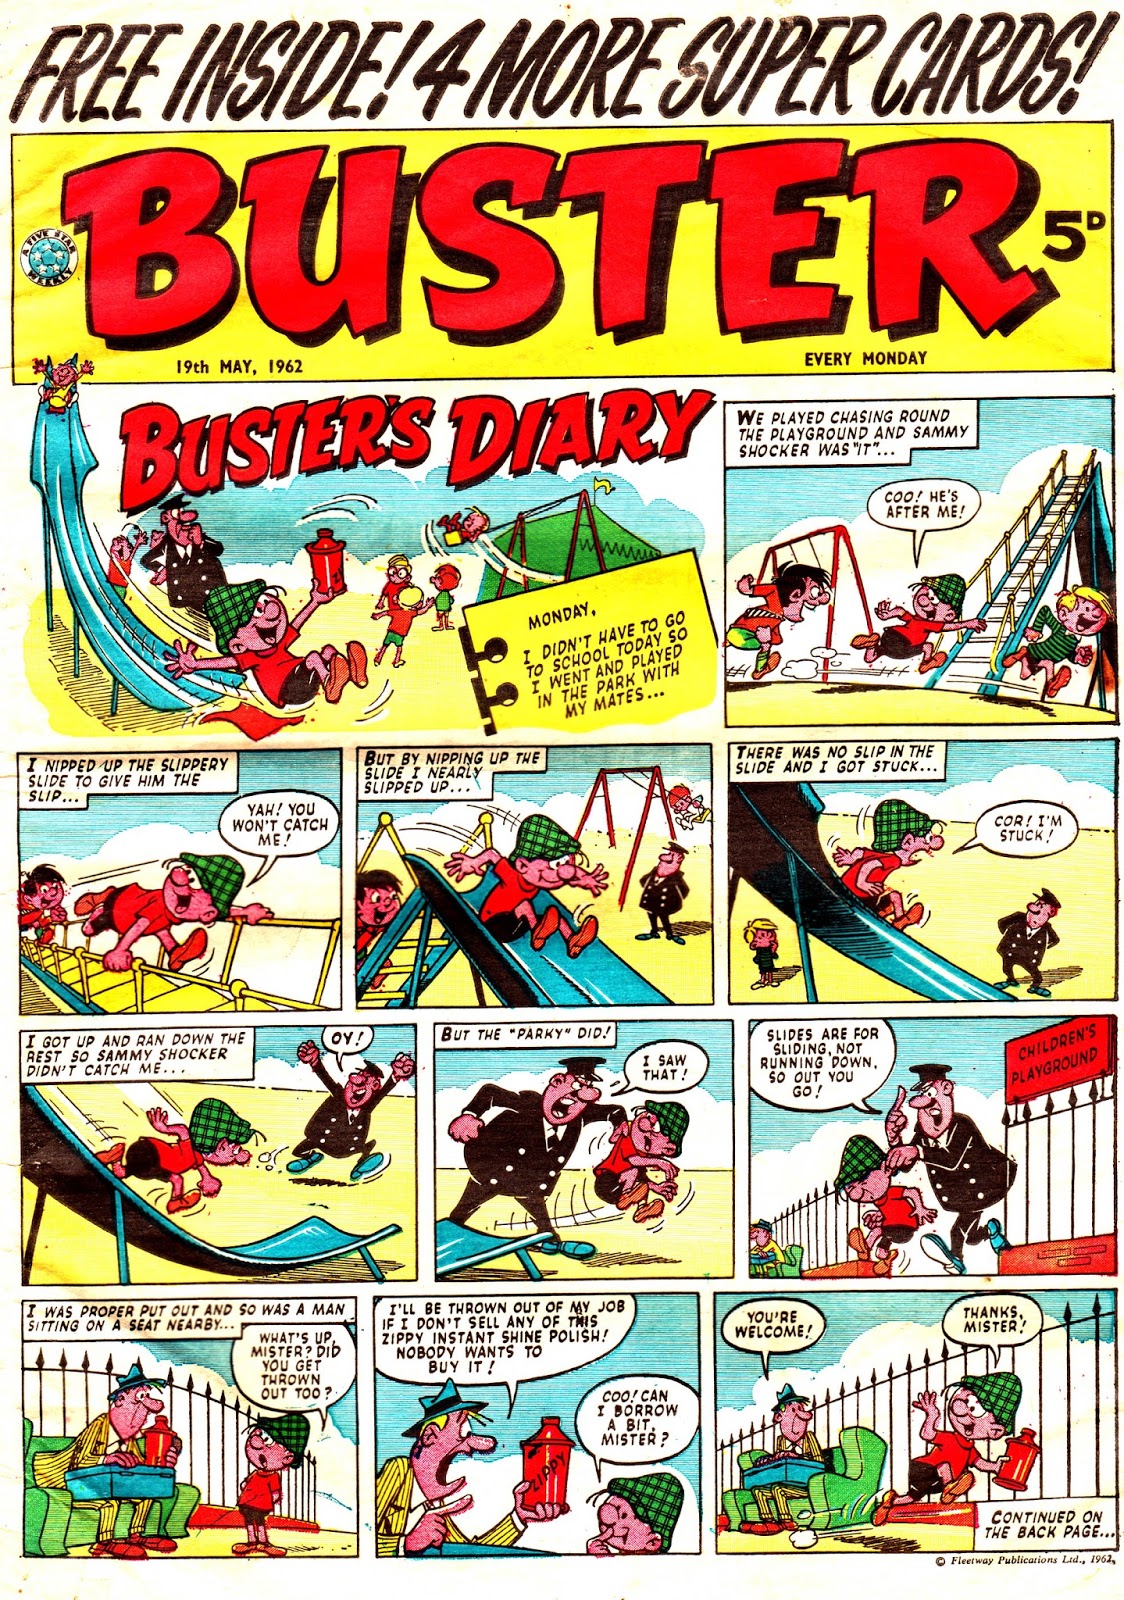 Buster's Diary Buster nº 104 Nadal